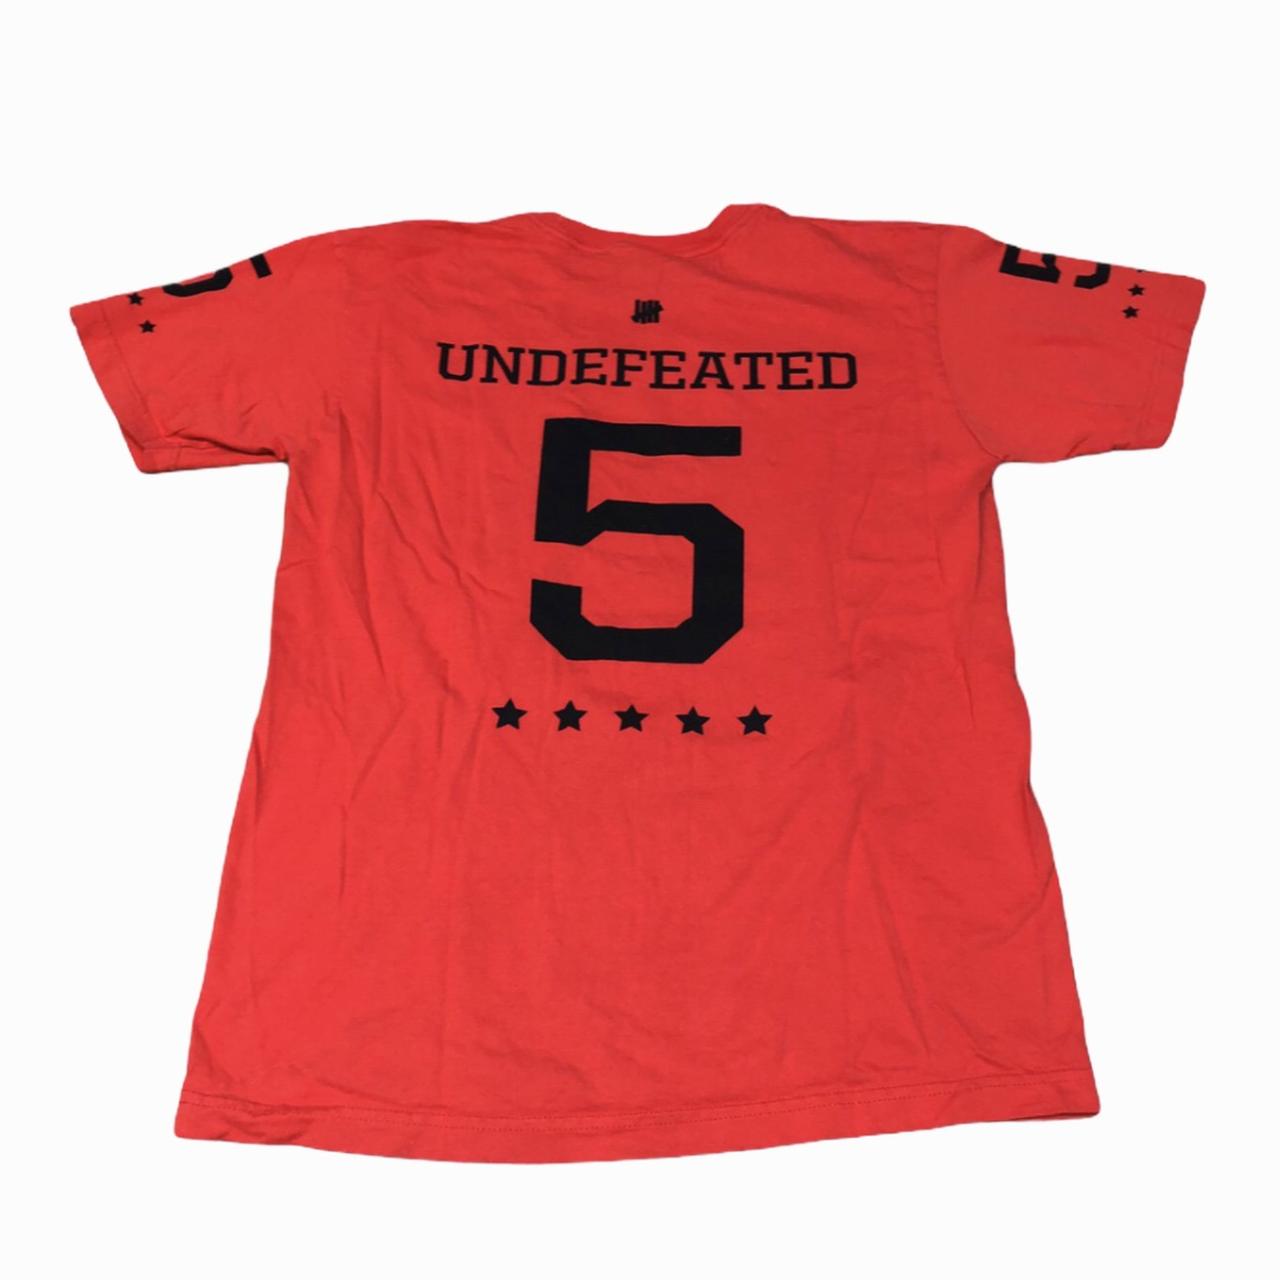 Product Image 2 - Undefeated General Tshirt 
Size: L